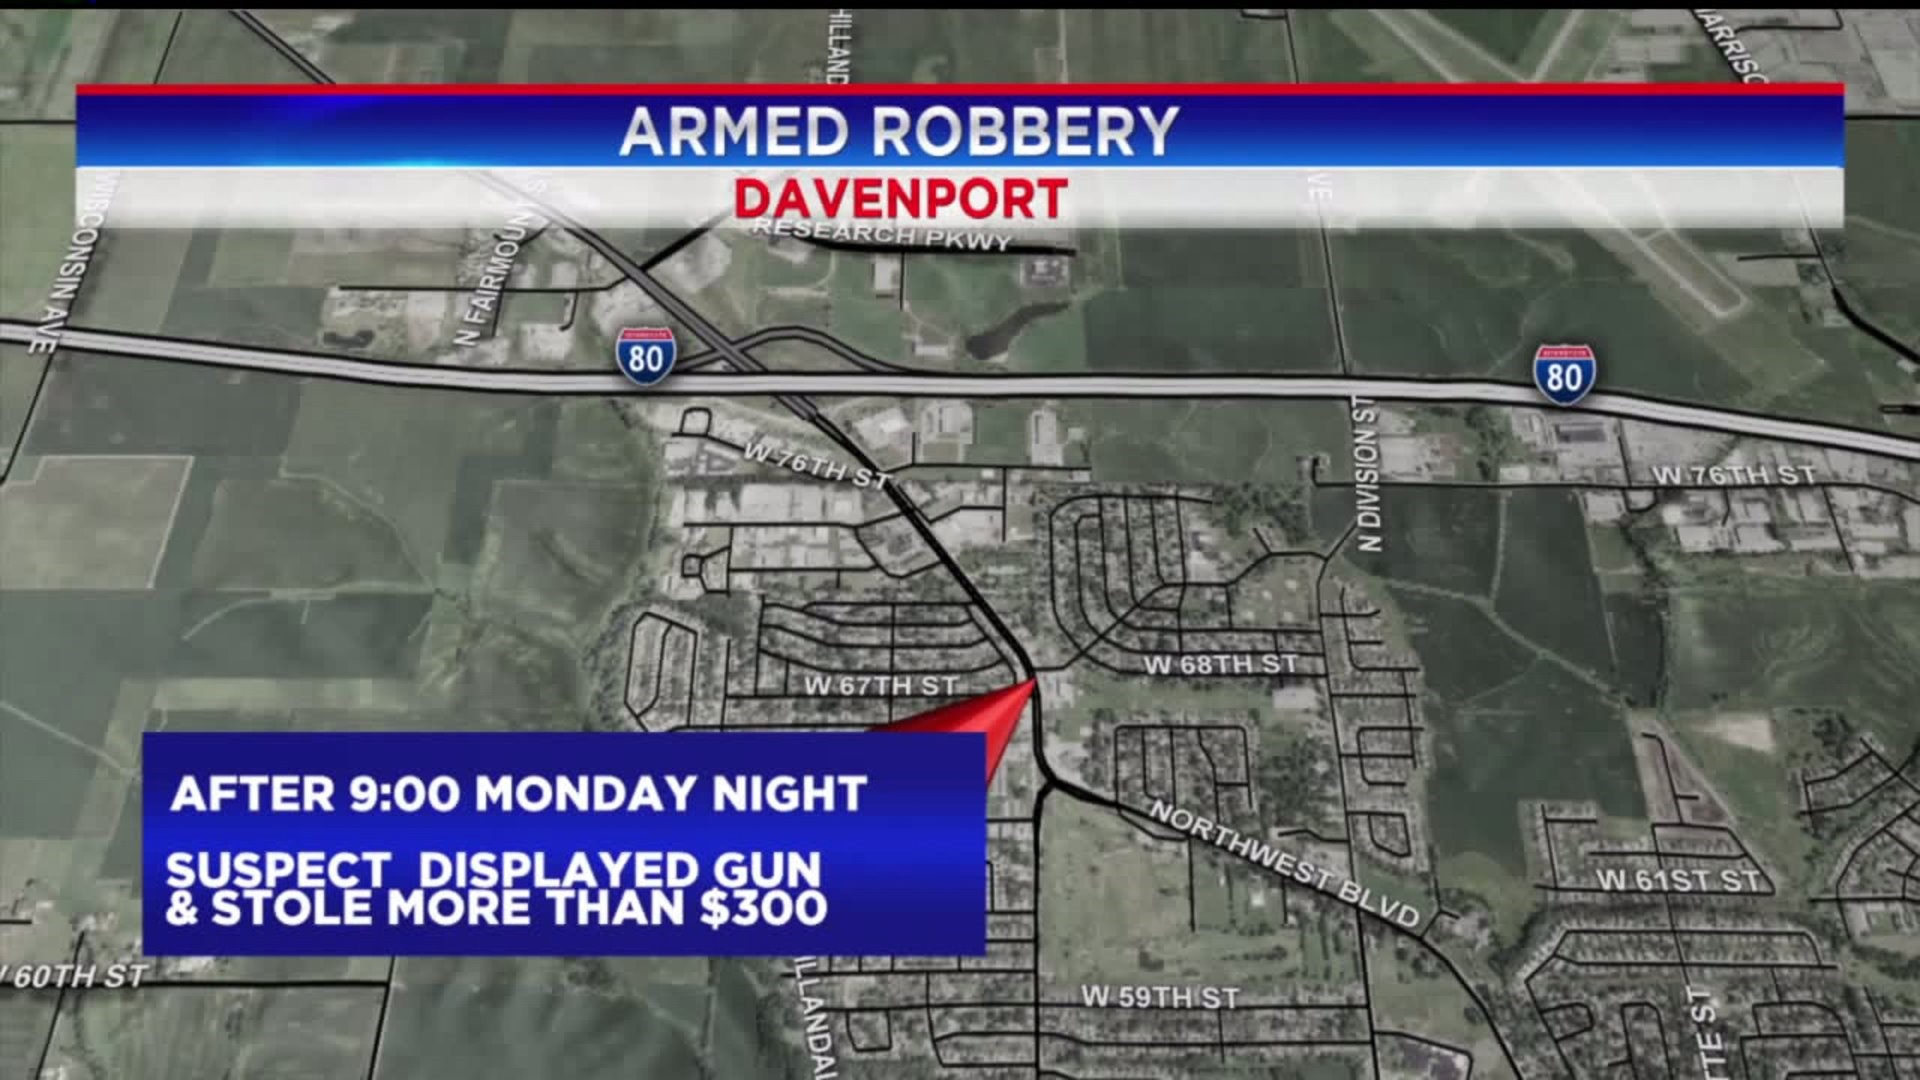 Armed Robbery in Davenport